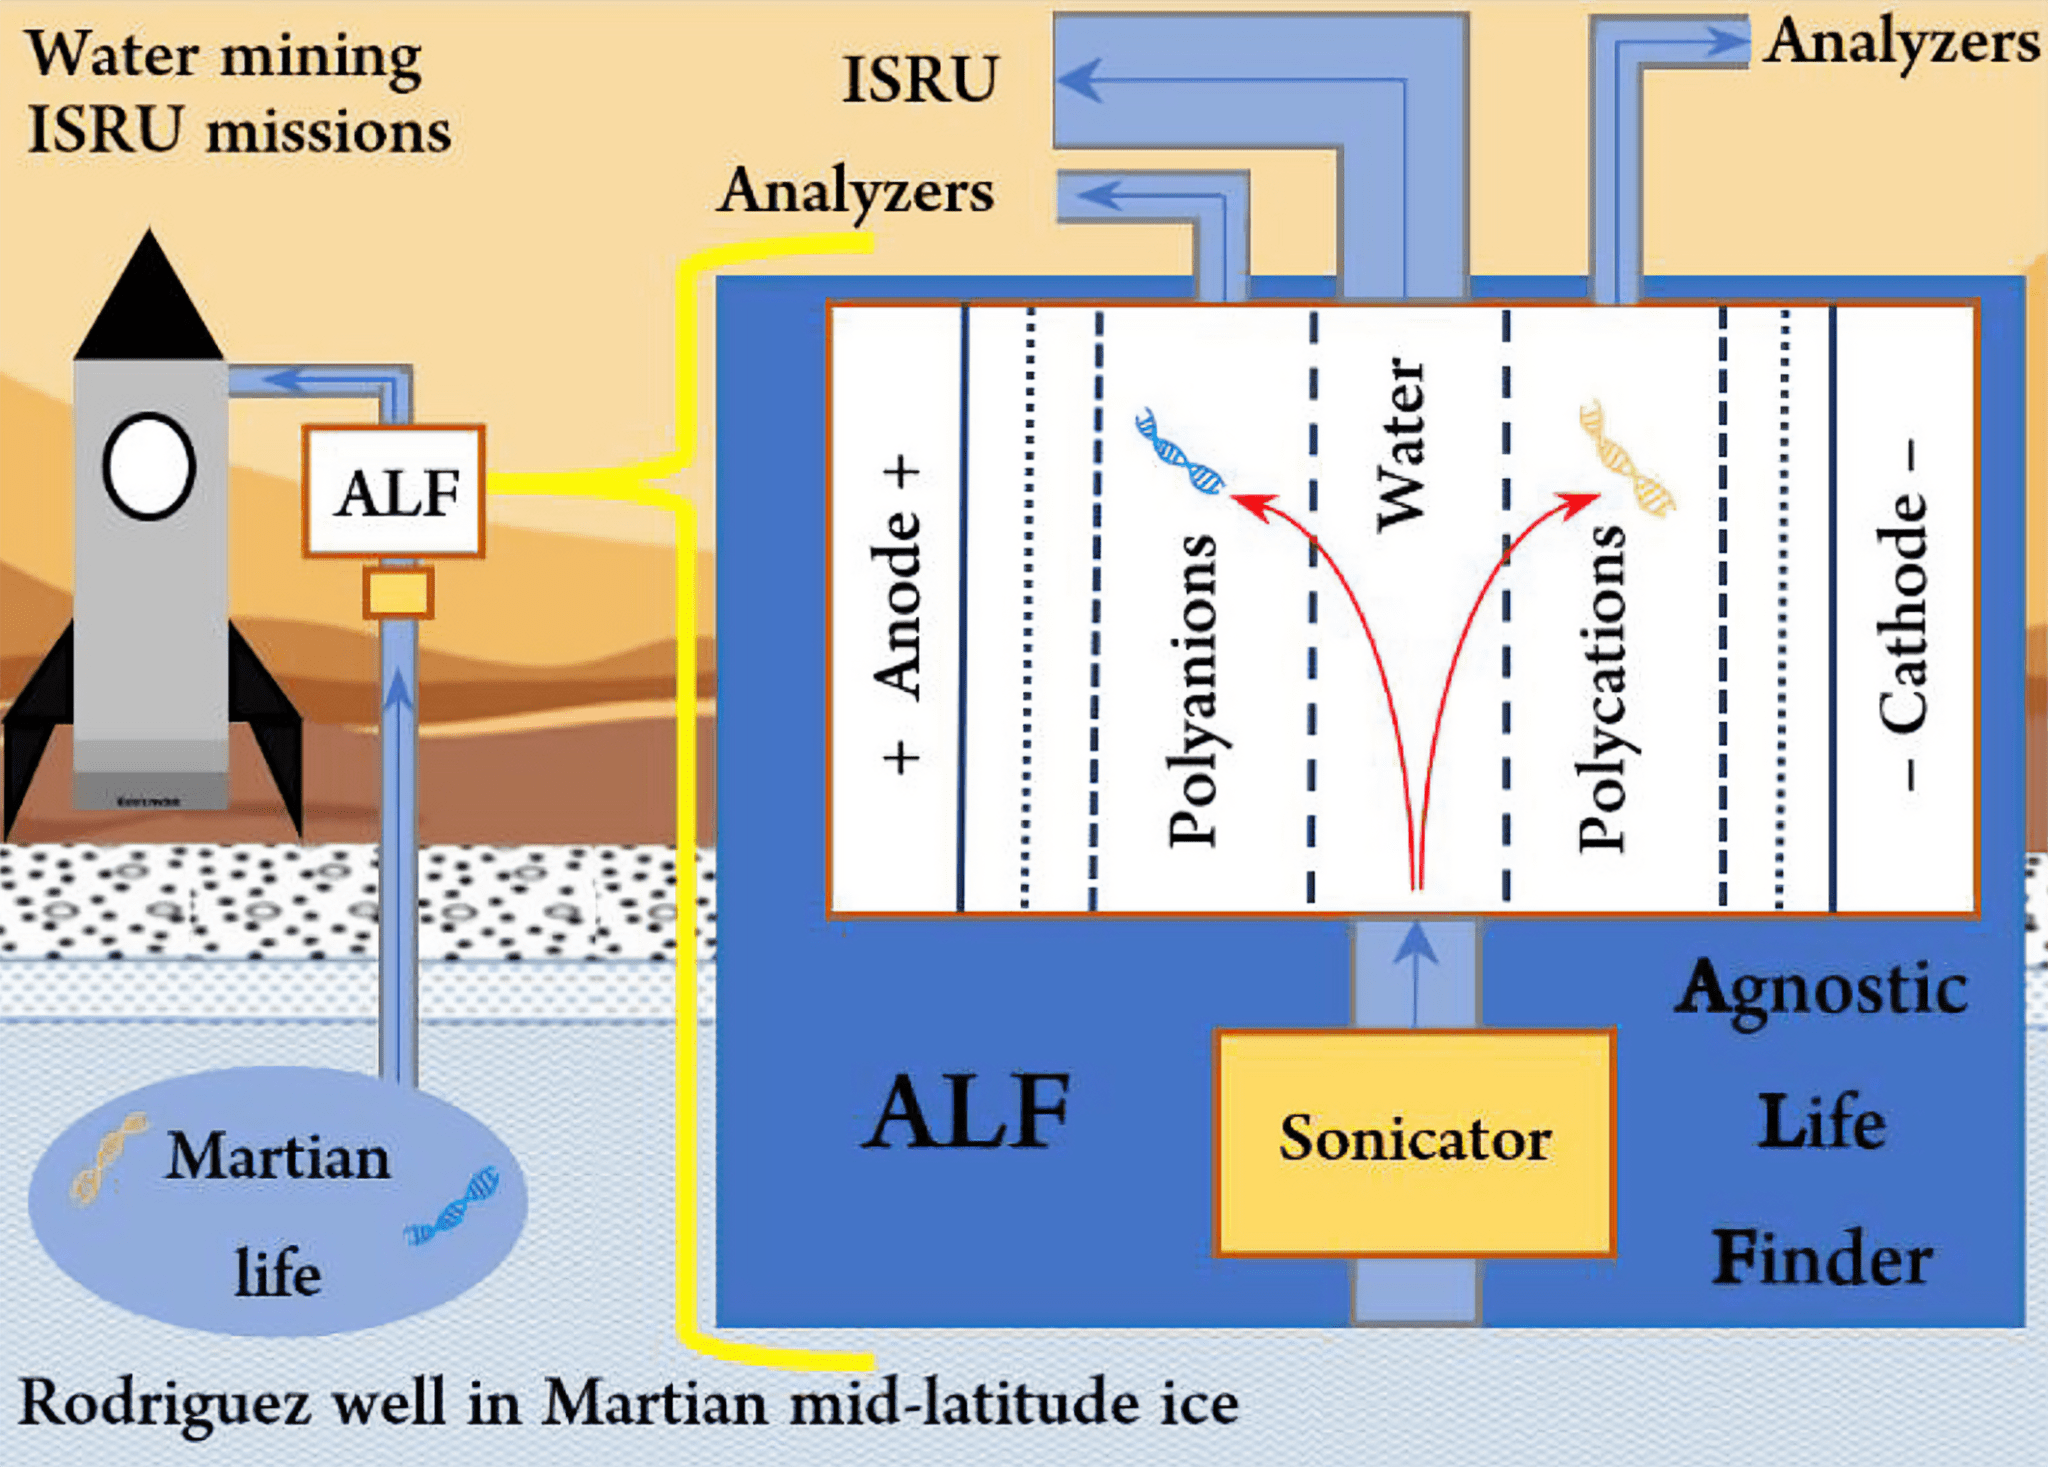 Artist rendition of labled Water mining ISRU missins on a lunar surface.